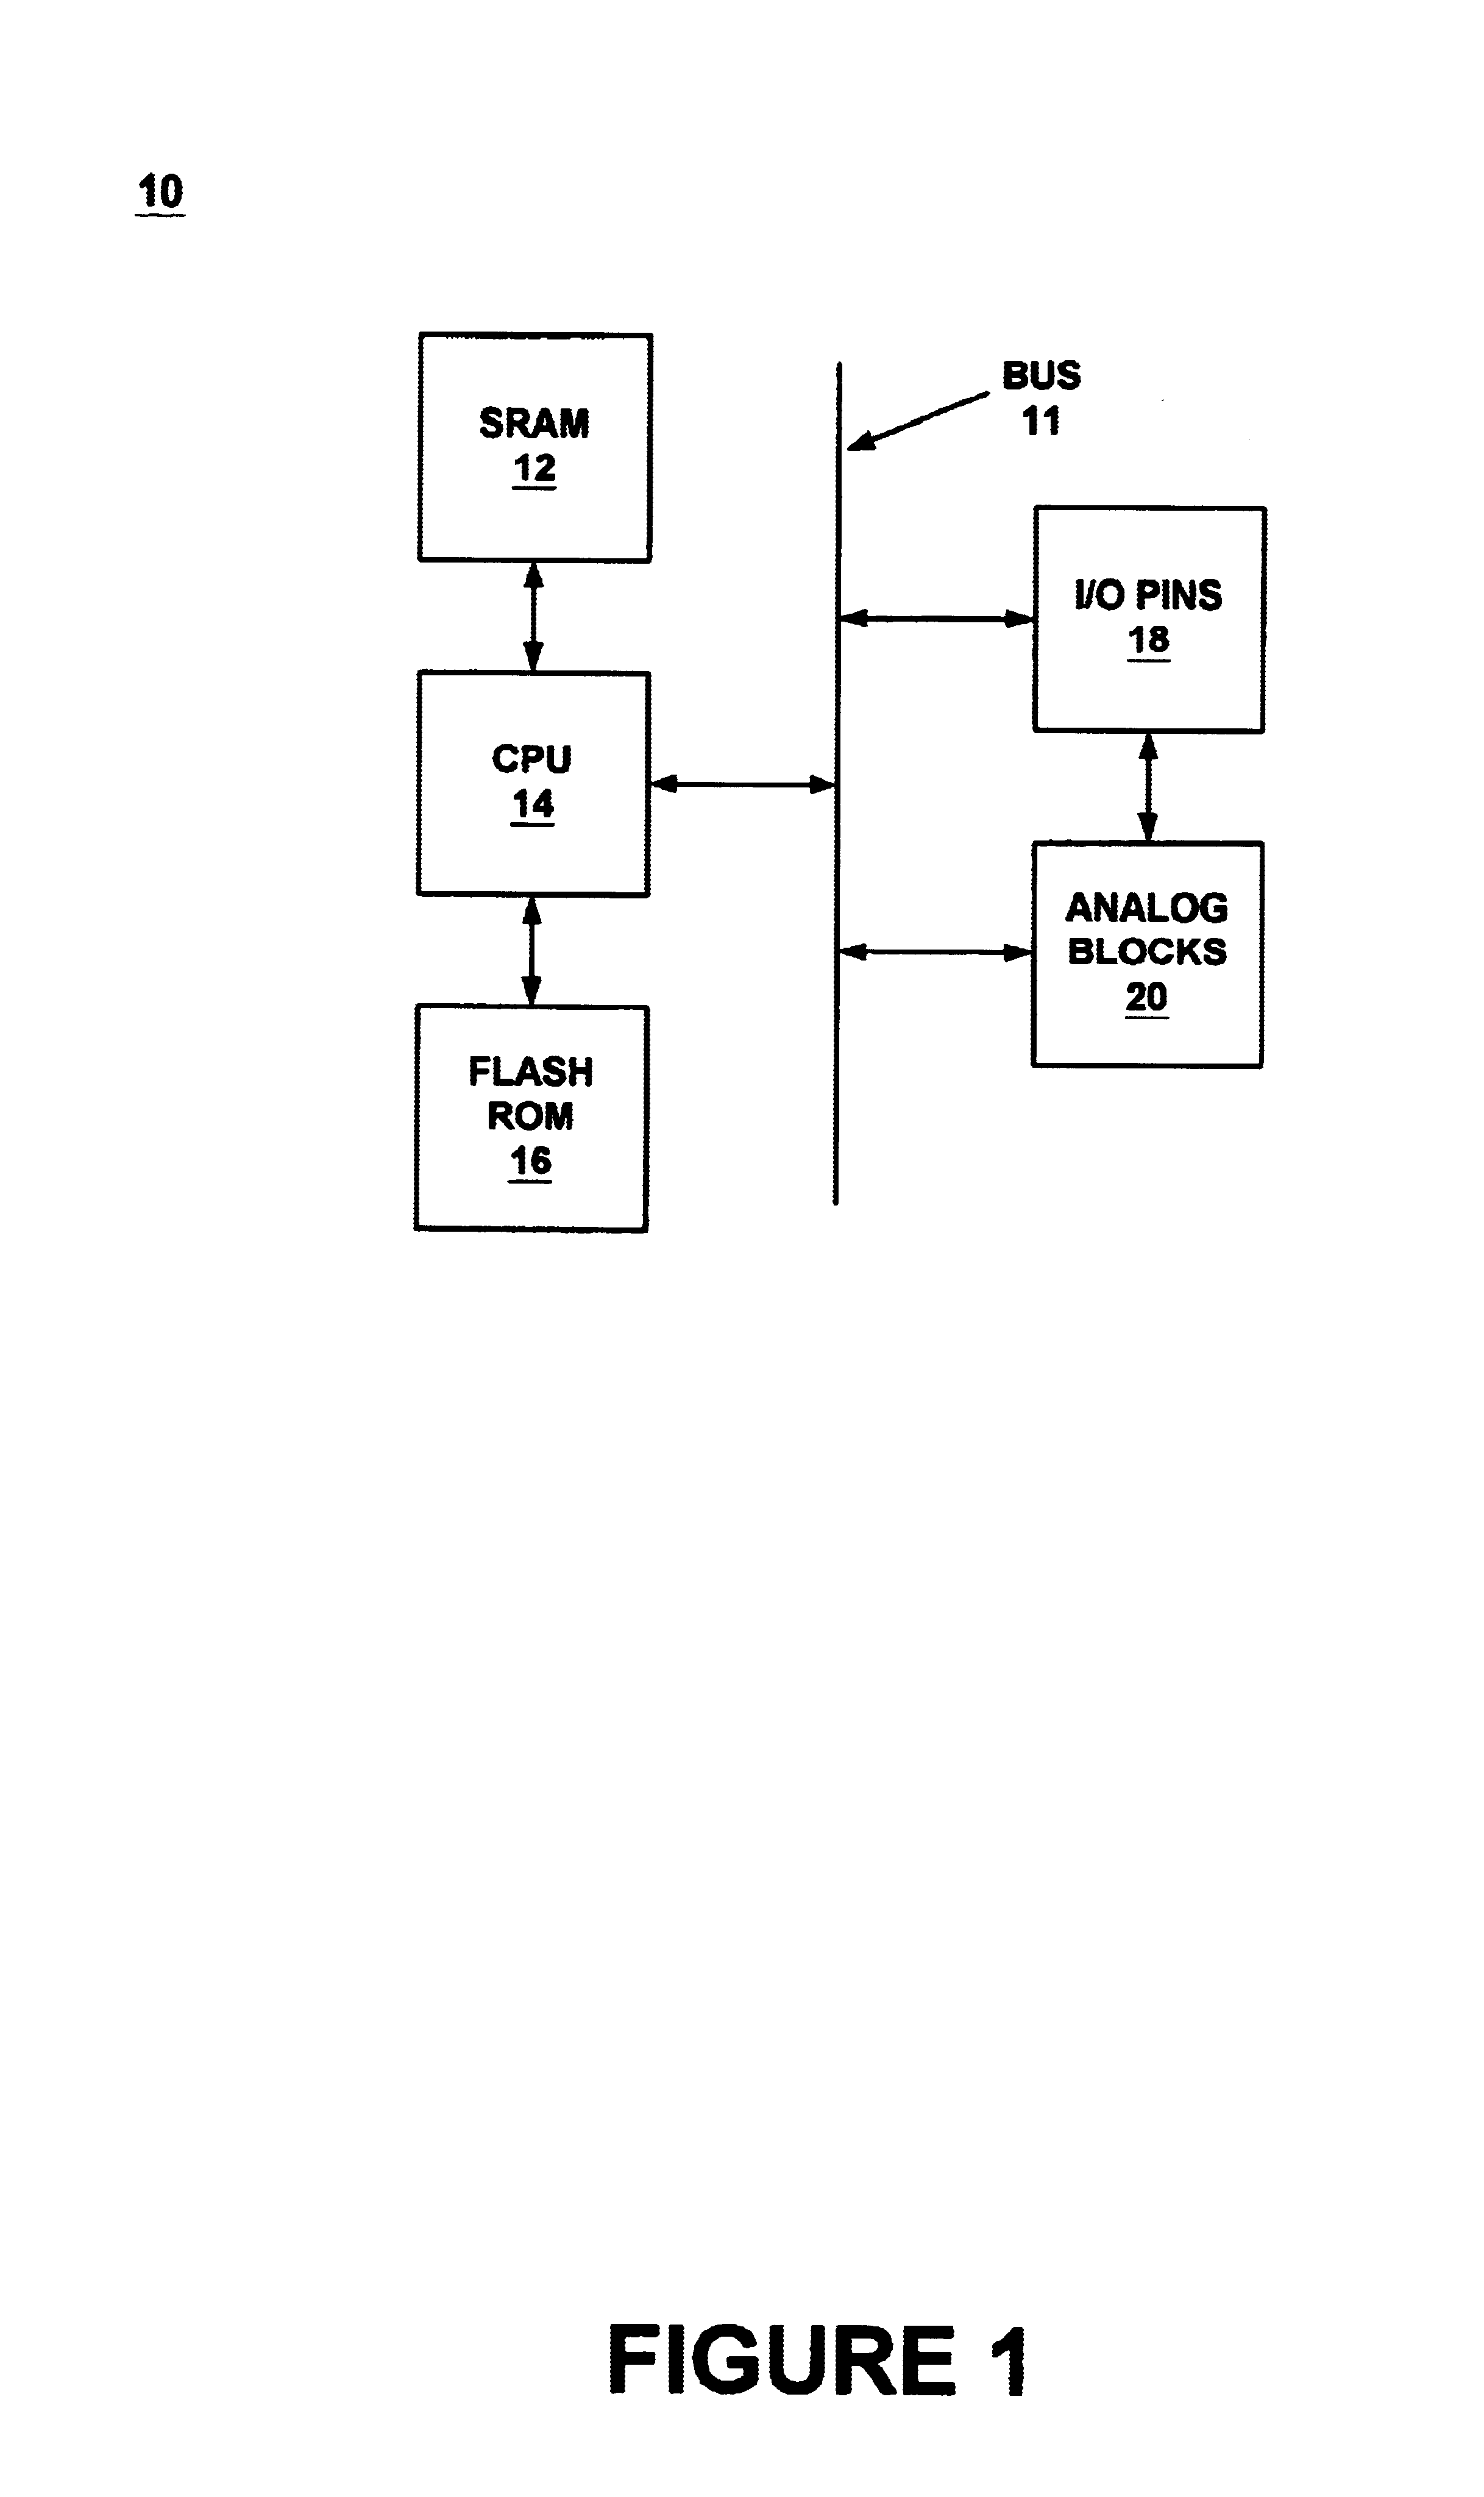 Programmable analog system architecture